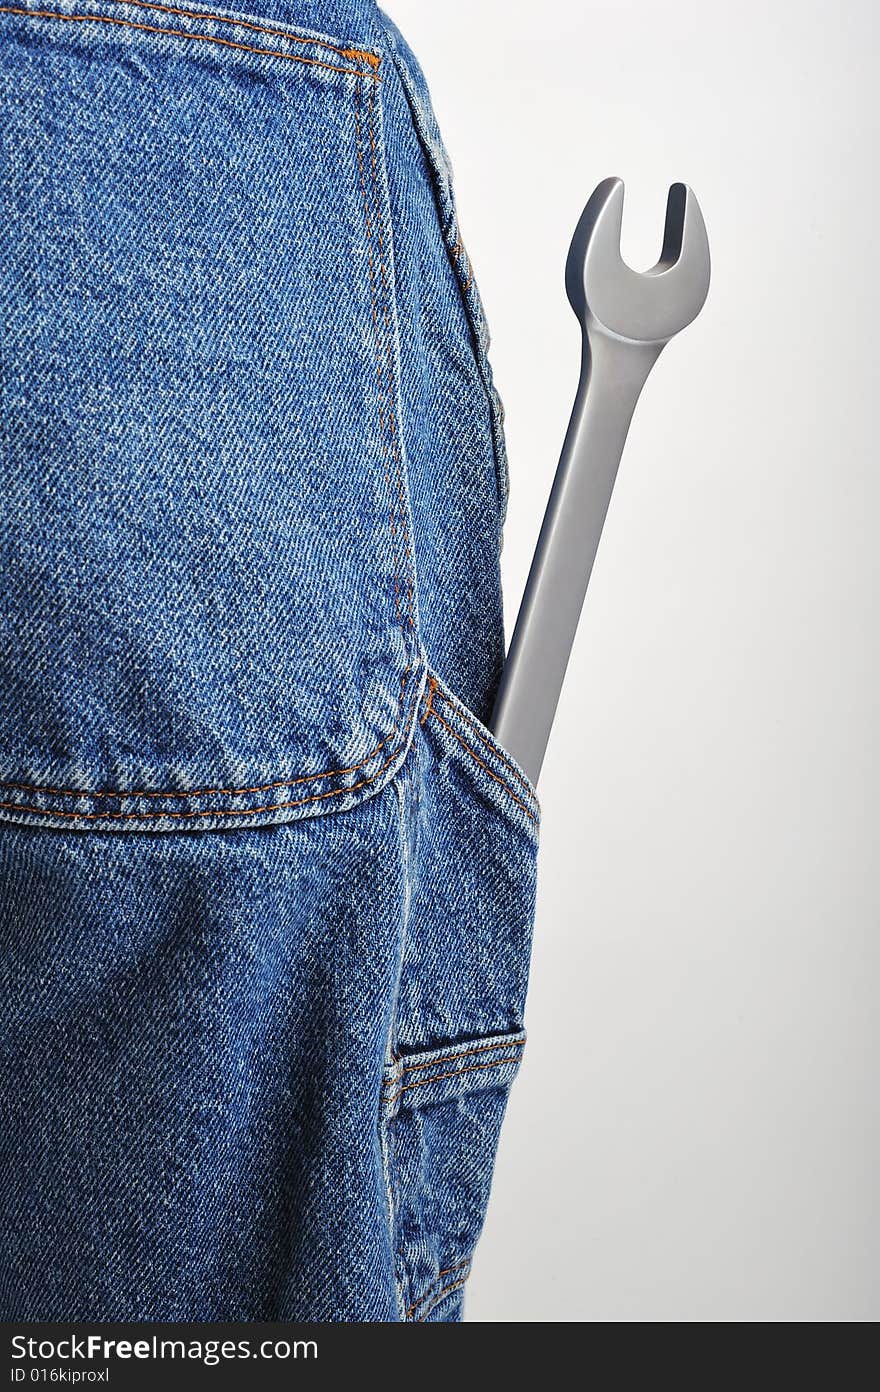 Close up of a wrench in back pocket of jeans. Close up of a wrench in back pocket of jeans